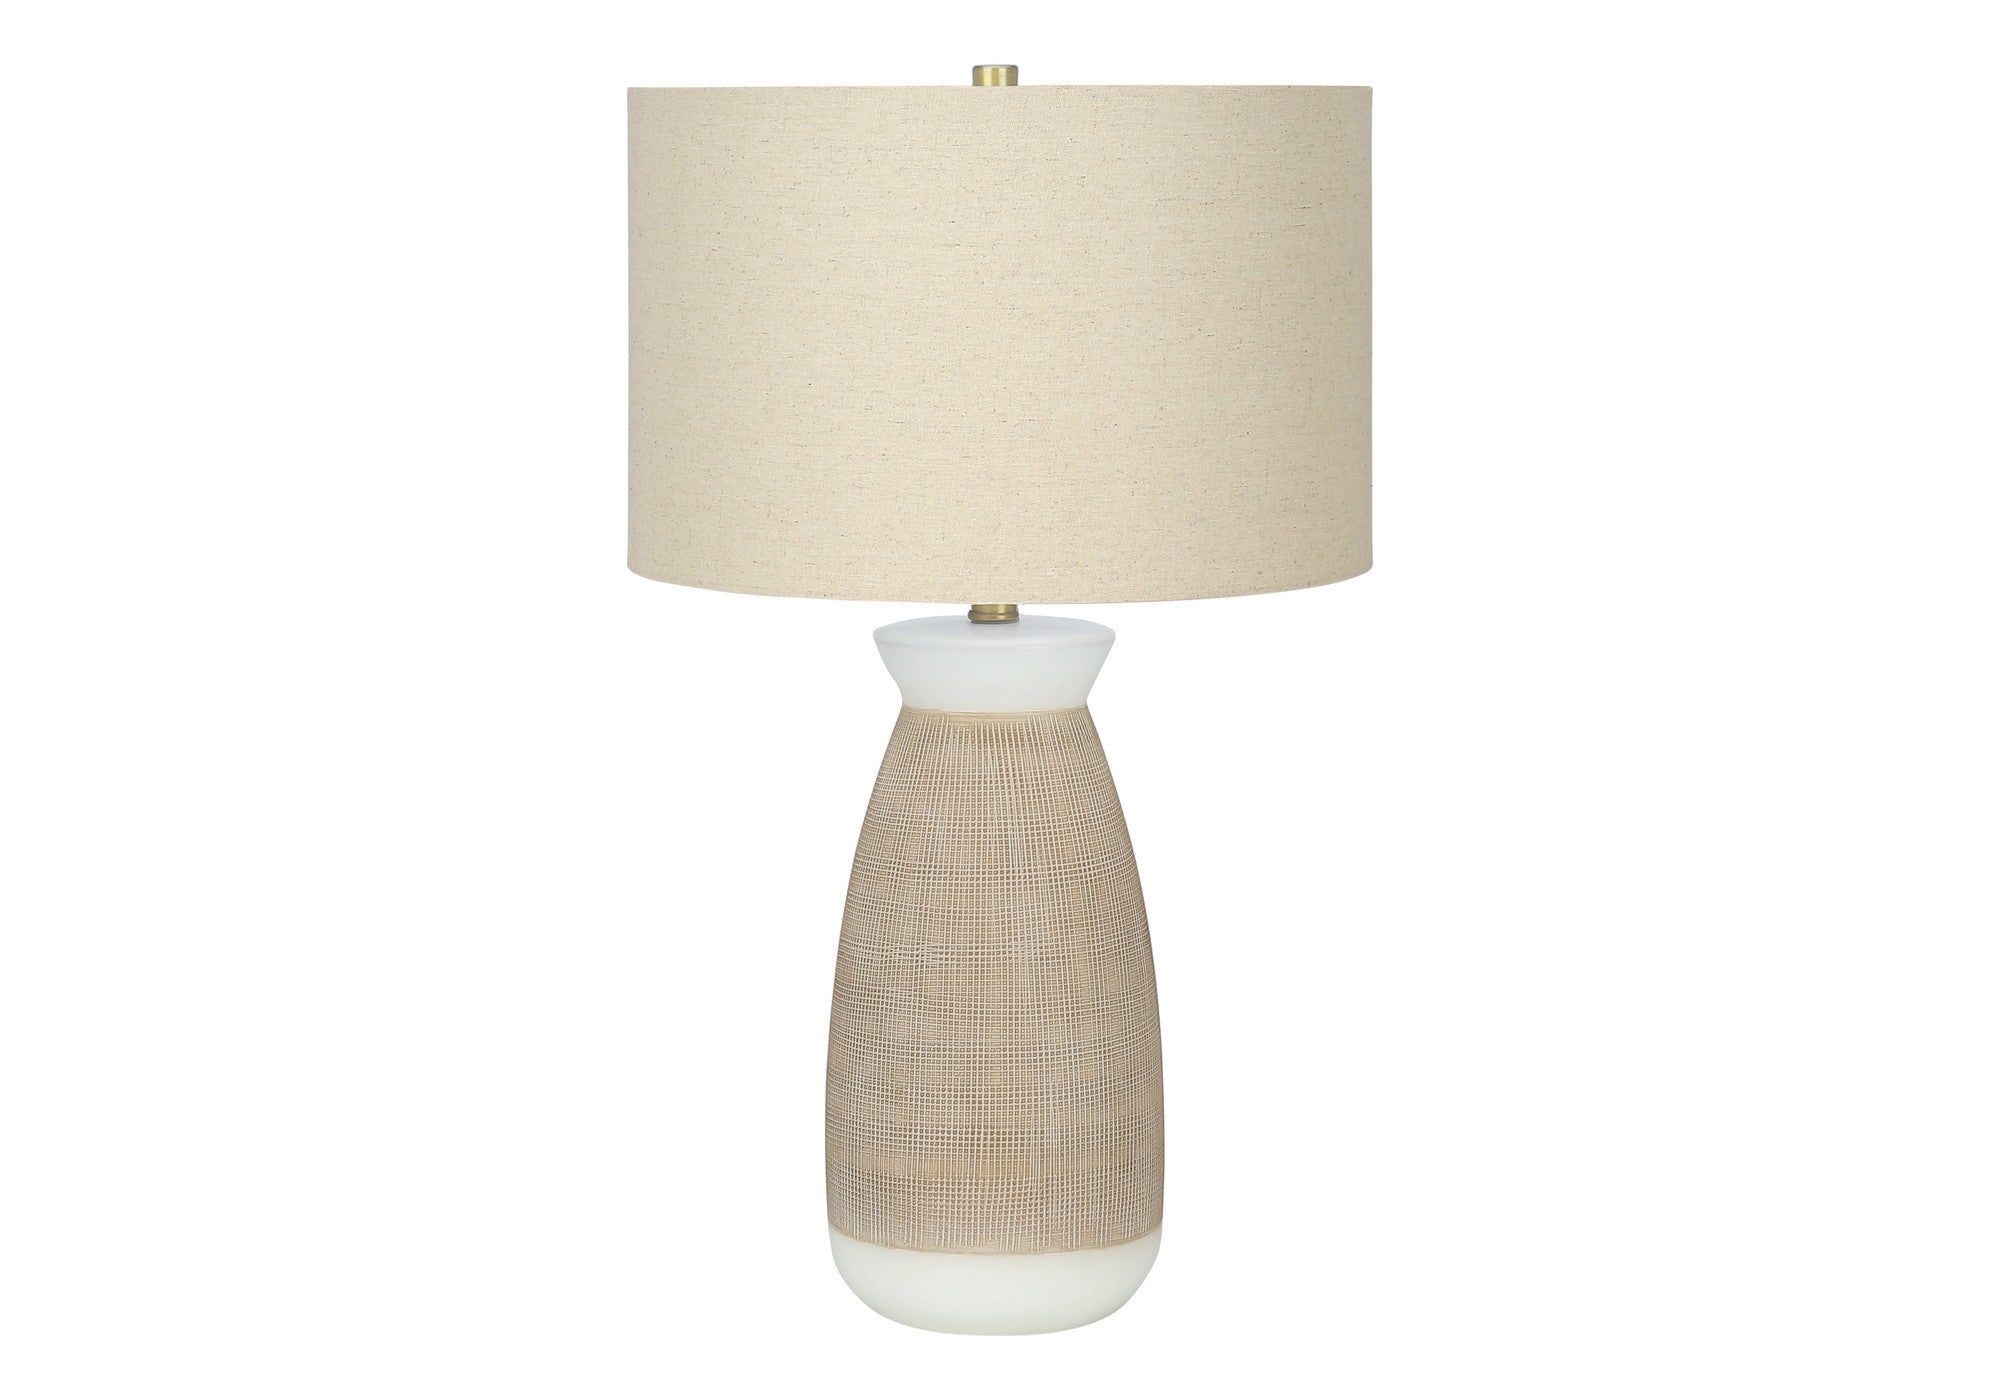 27" Brown and White Ceramic Round Table Lamp With Beige Drum Shade